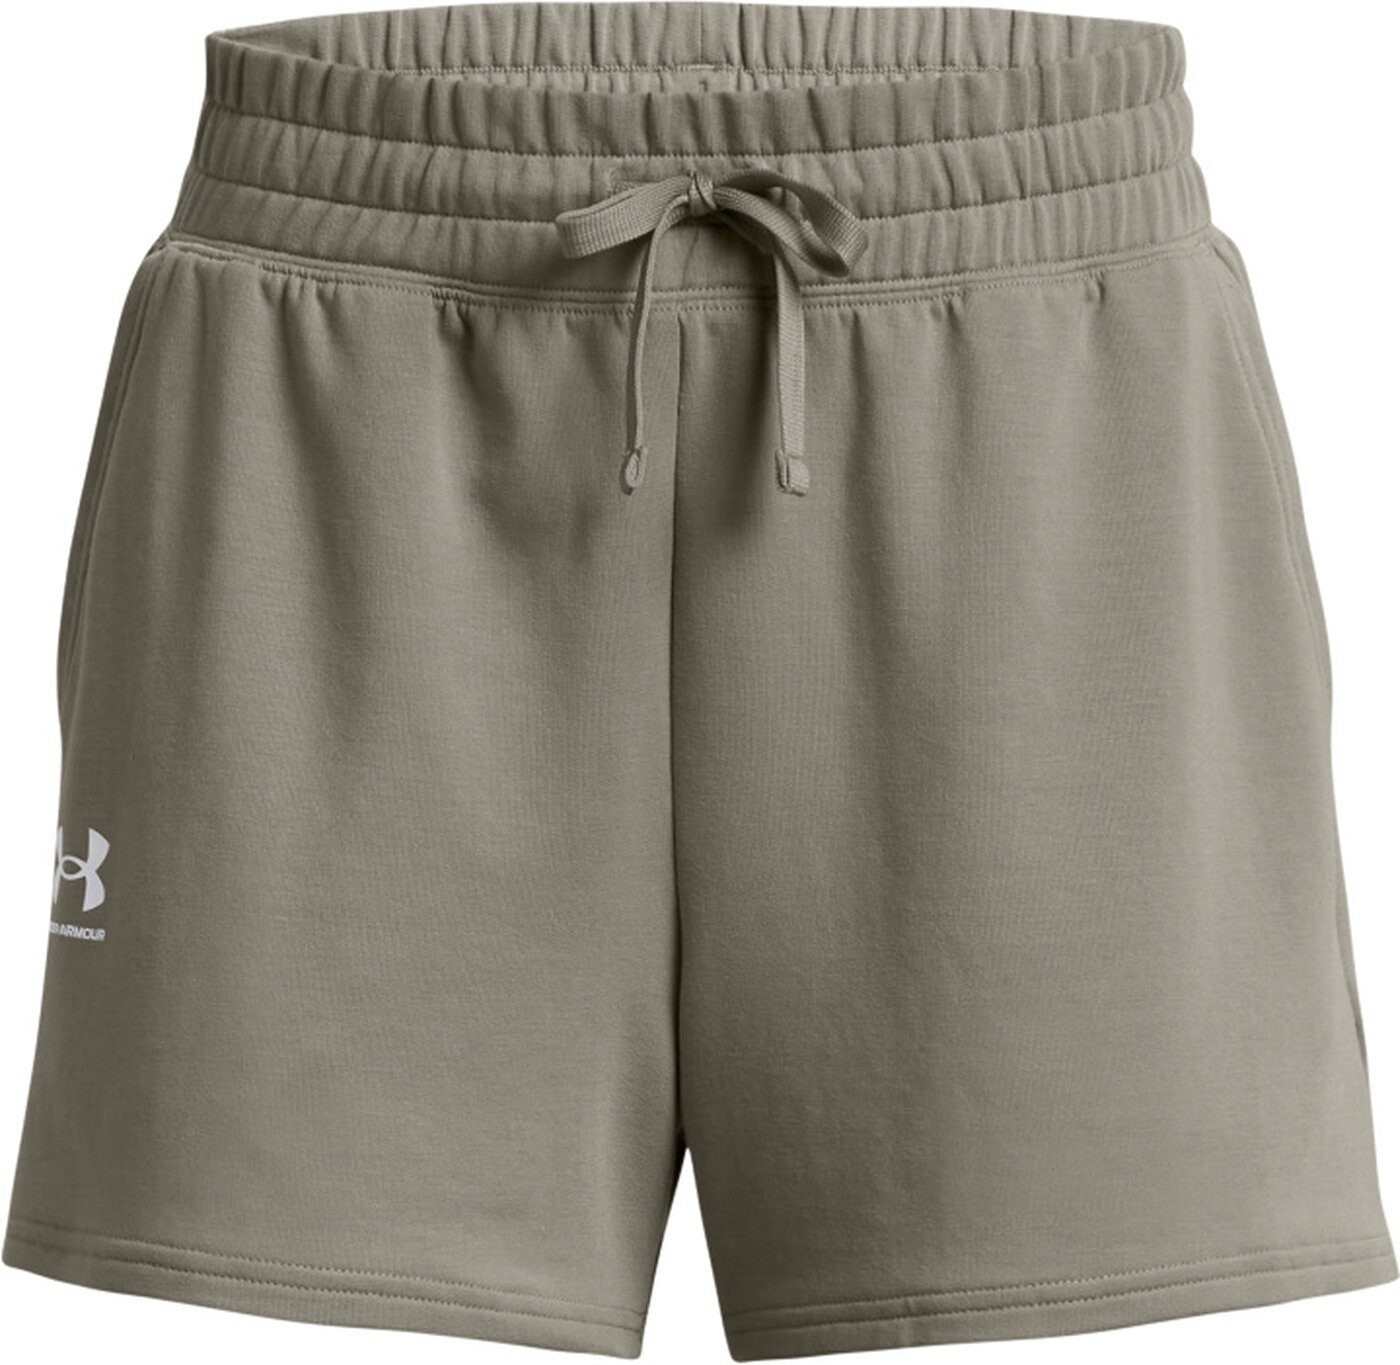 RIVAL Under TERRY UA SHORT Shorts Armour®